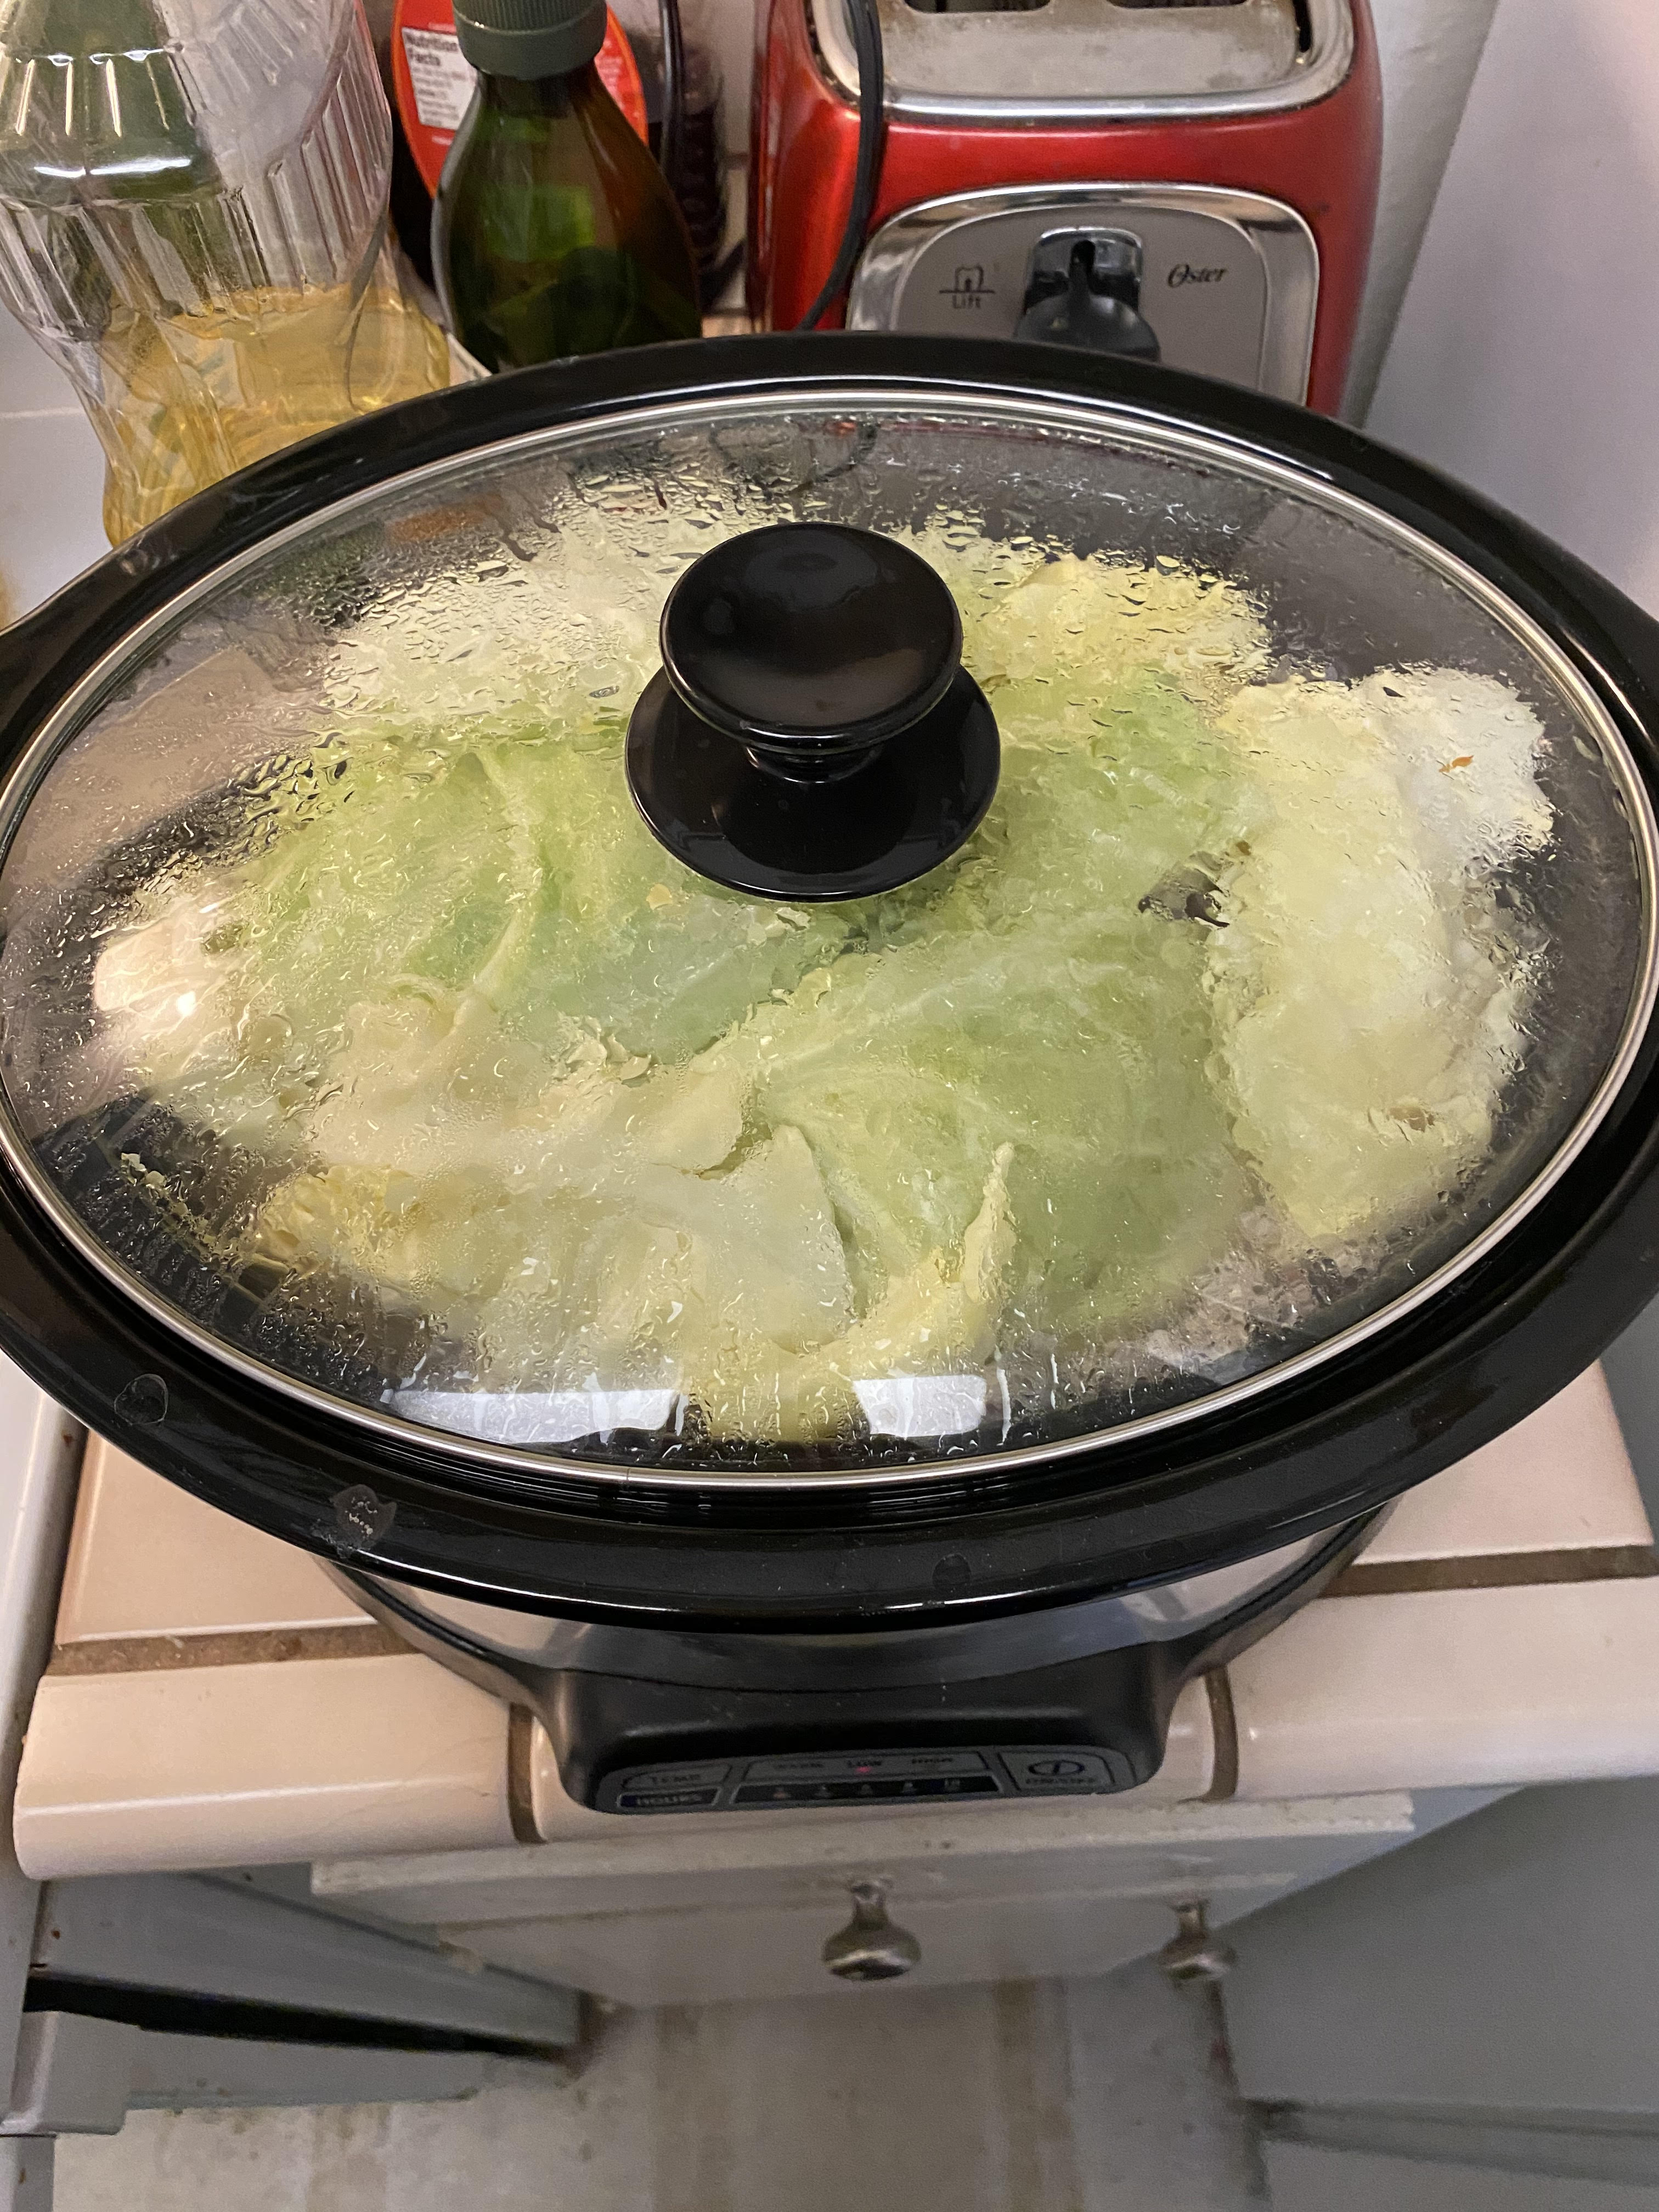 corned beef and cabbage cooking away in the slow cooker